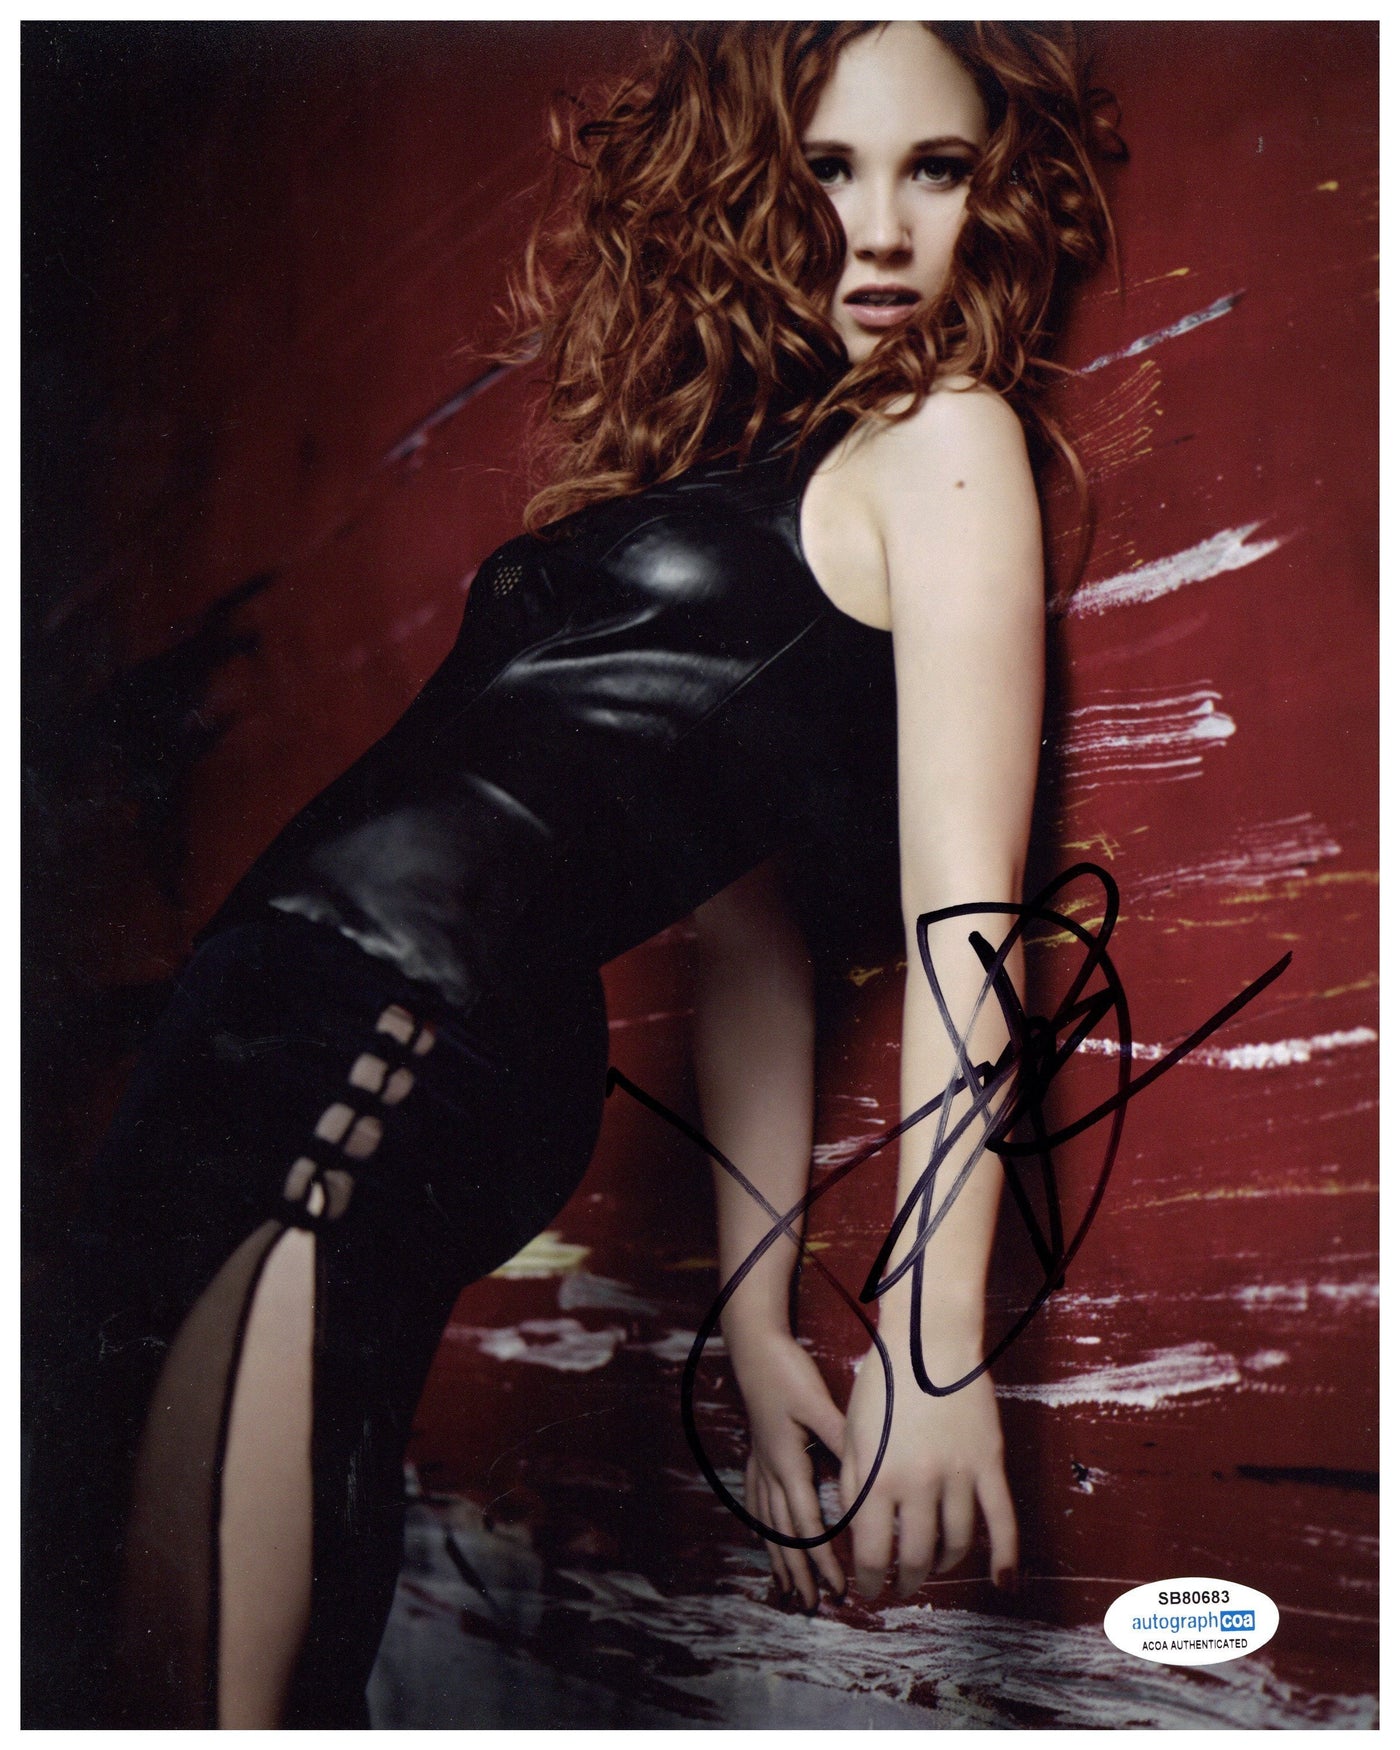 Juno Temple Signed 8x10 Photo Ted Lasso Star Autographed ACOA